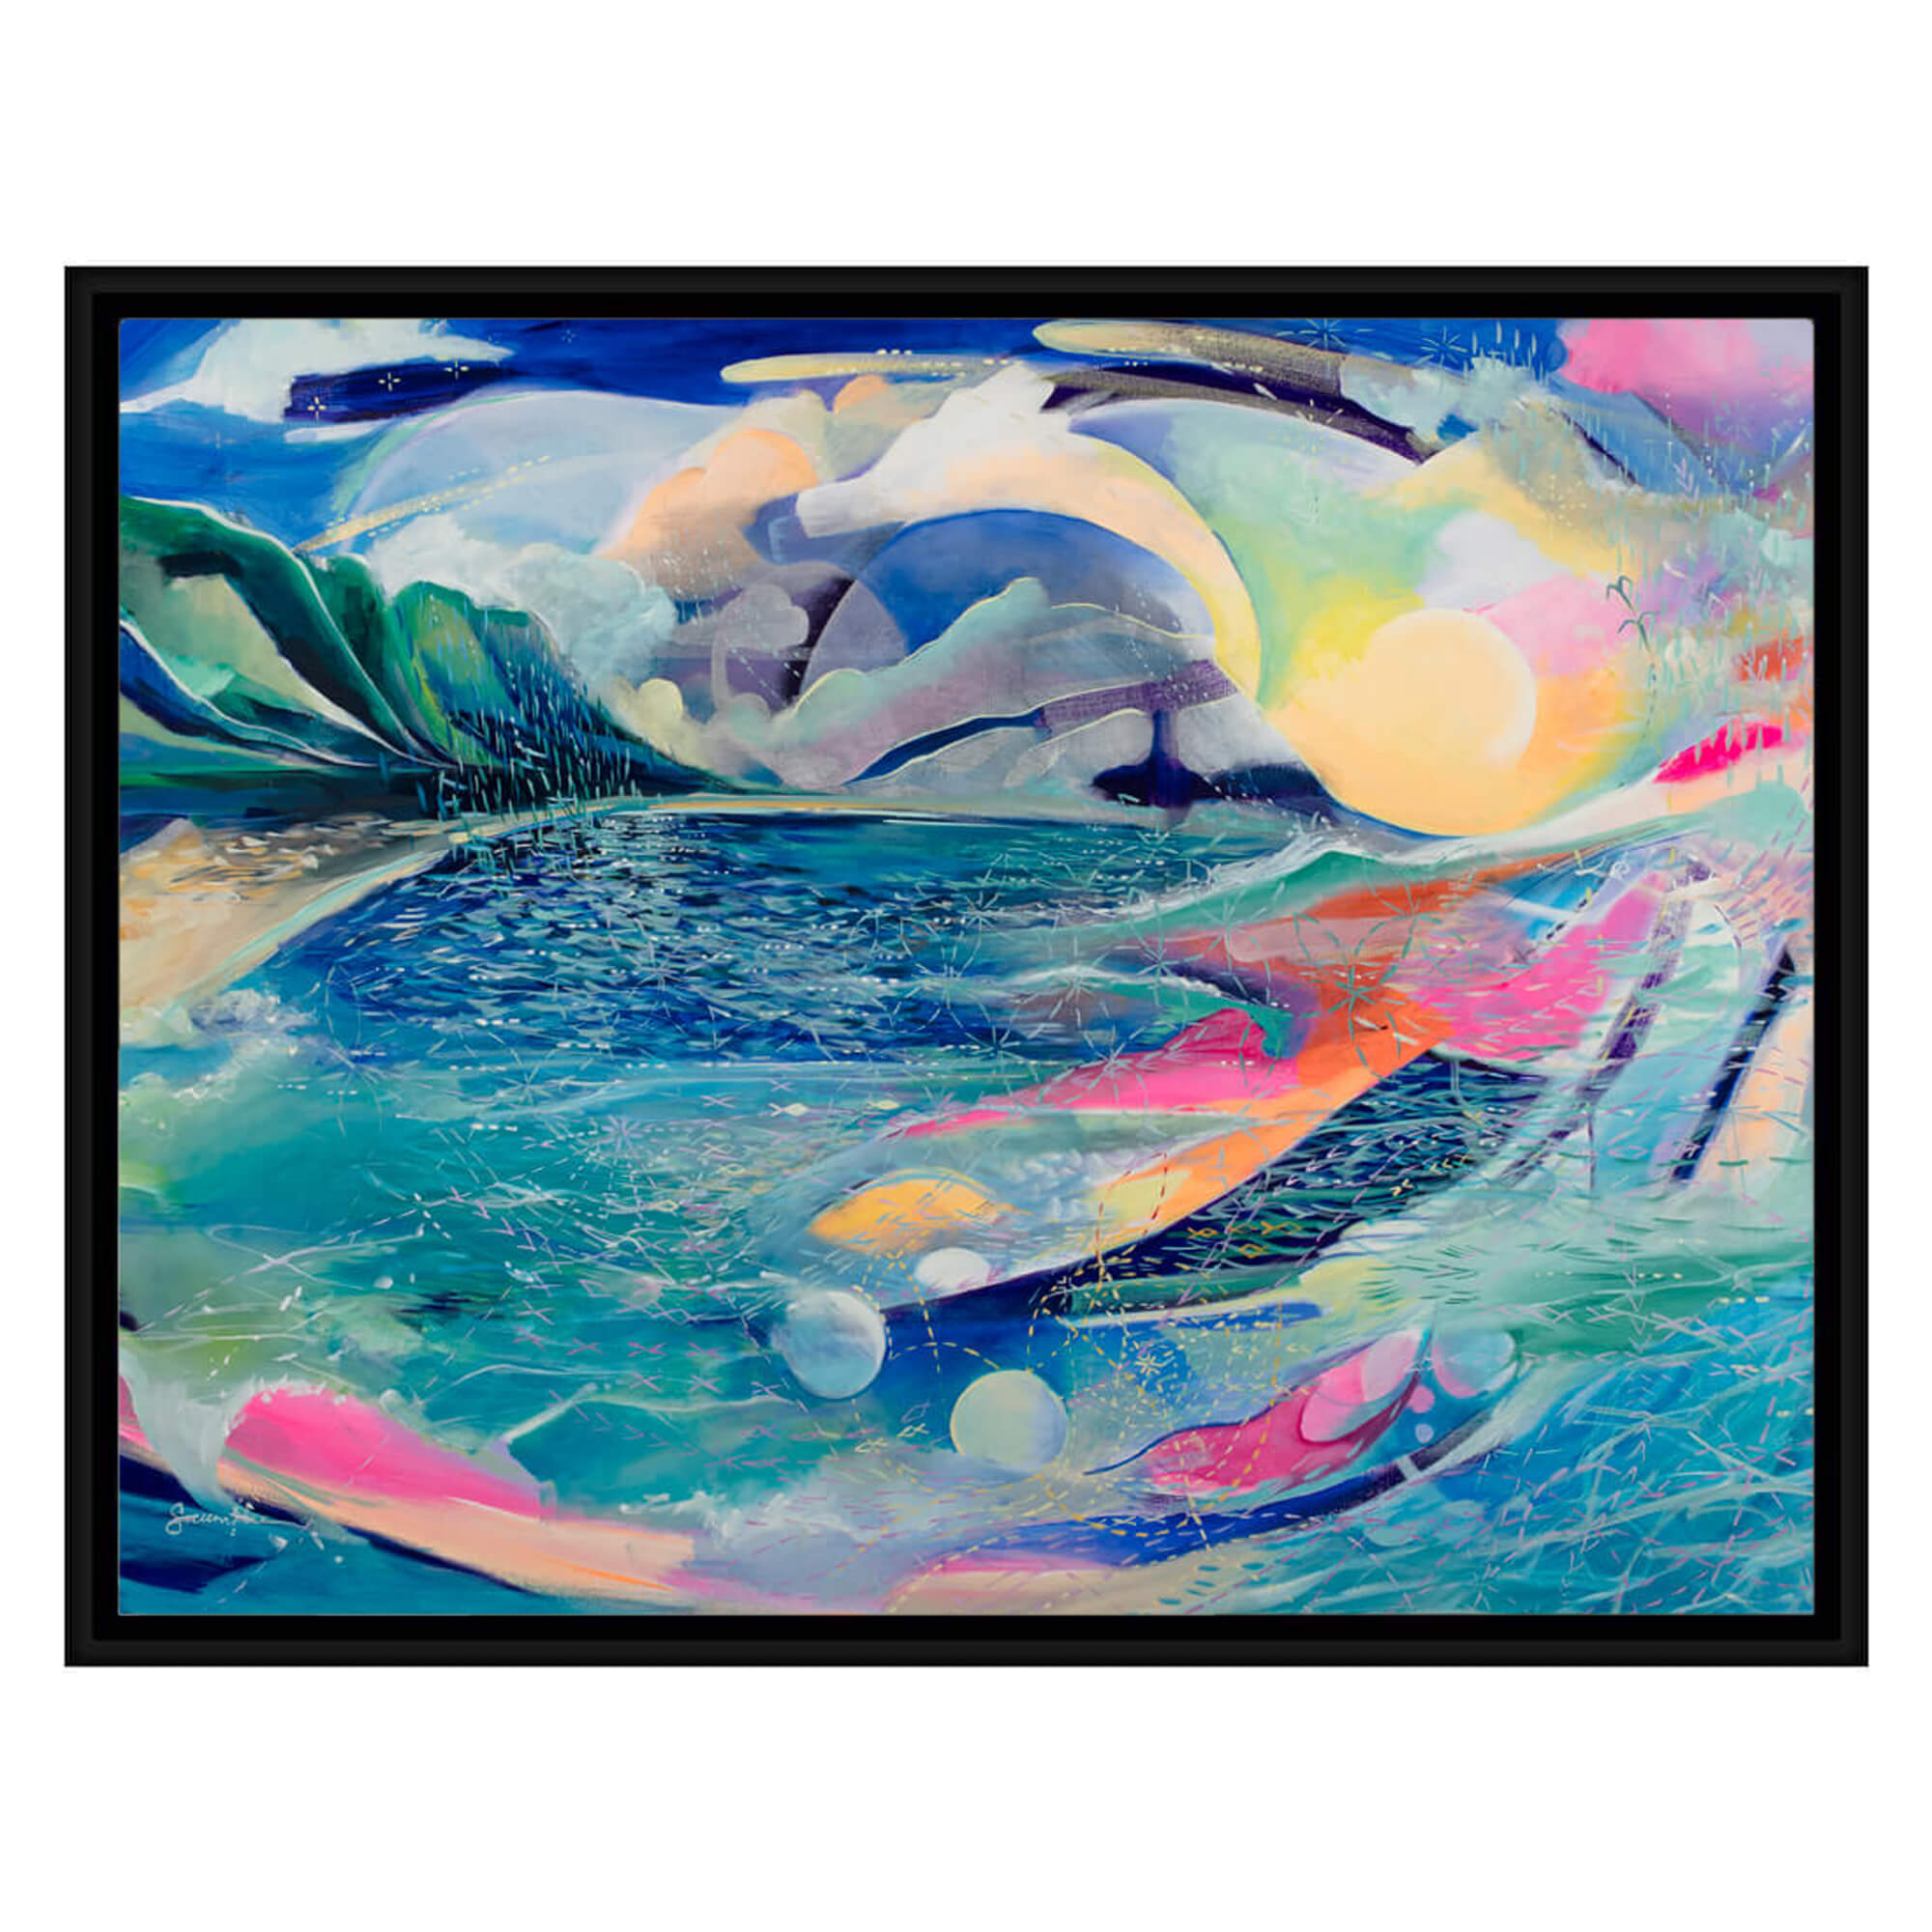 Framed canvas art print of an abstract artwork of a seascape with vibrant pastel colors Hawaii artist Saumolia Puapuaga 